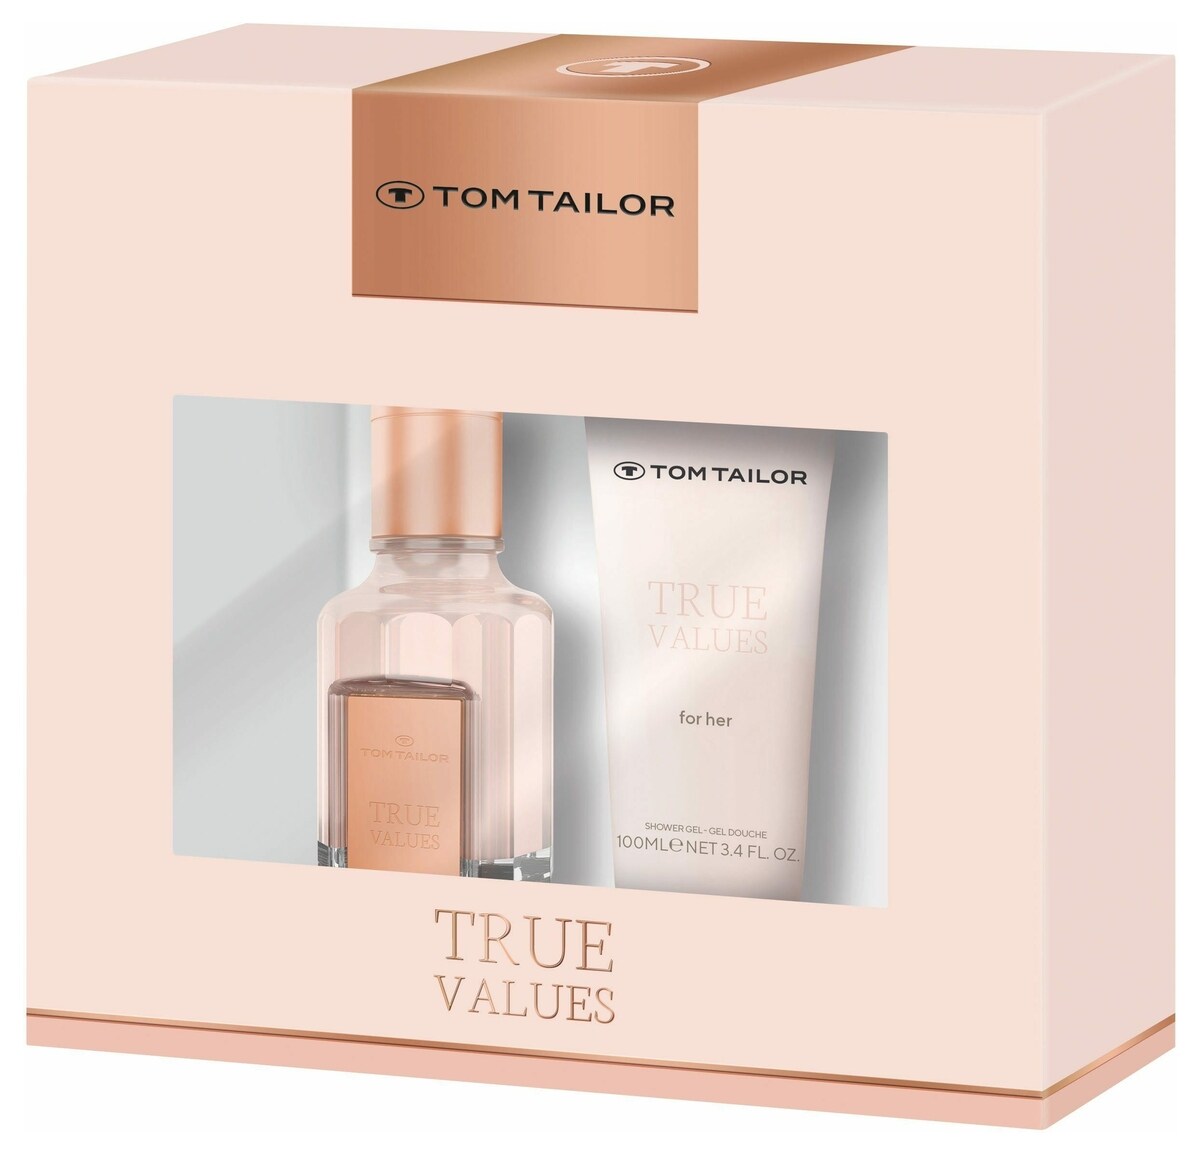 True Values for Her by Tom Tailor » Reviews & Perfume Facts